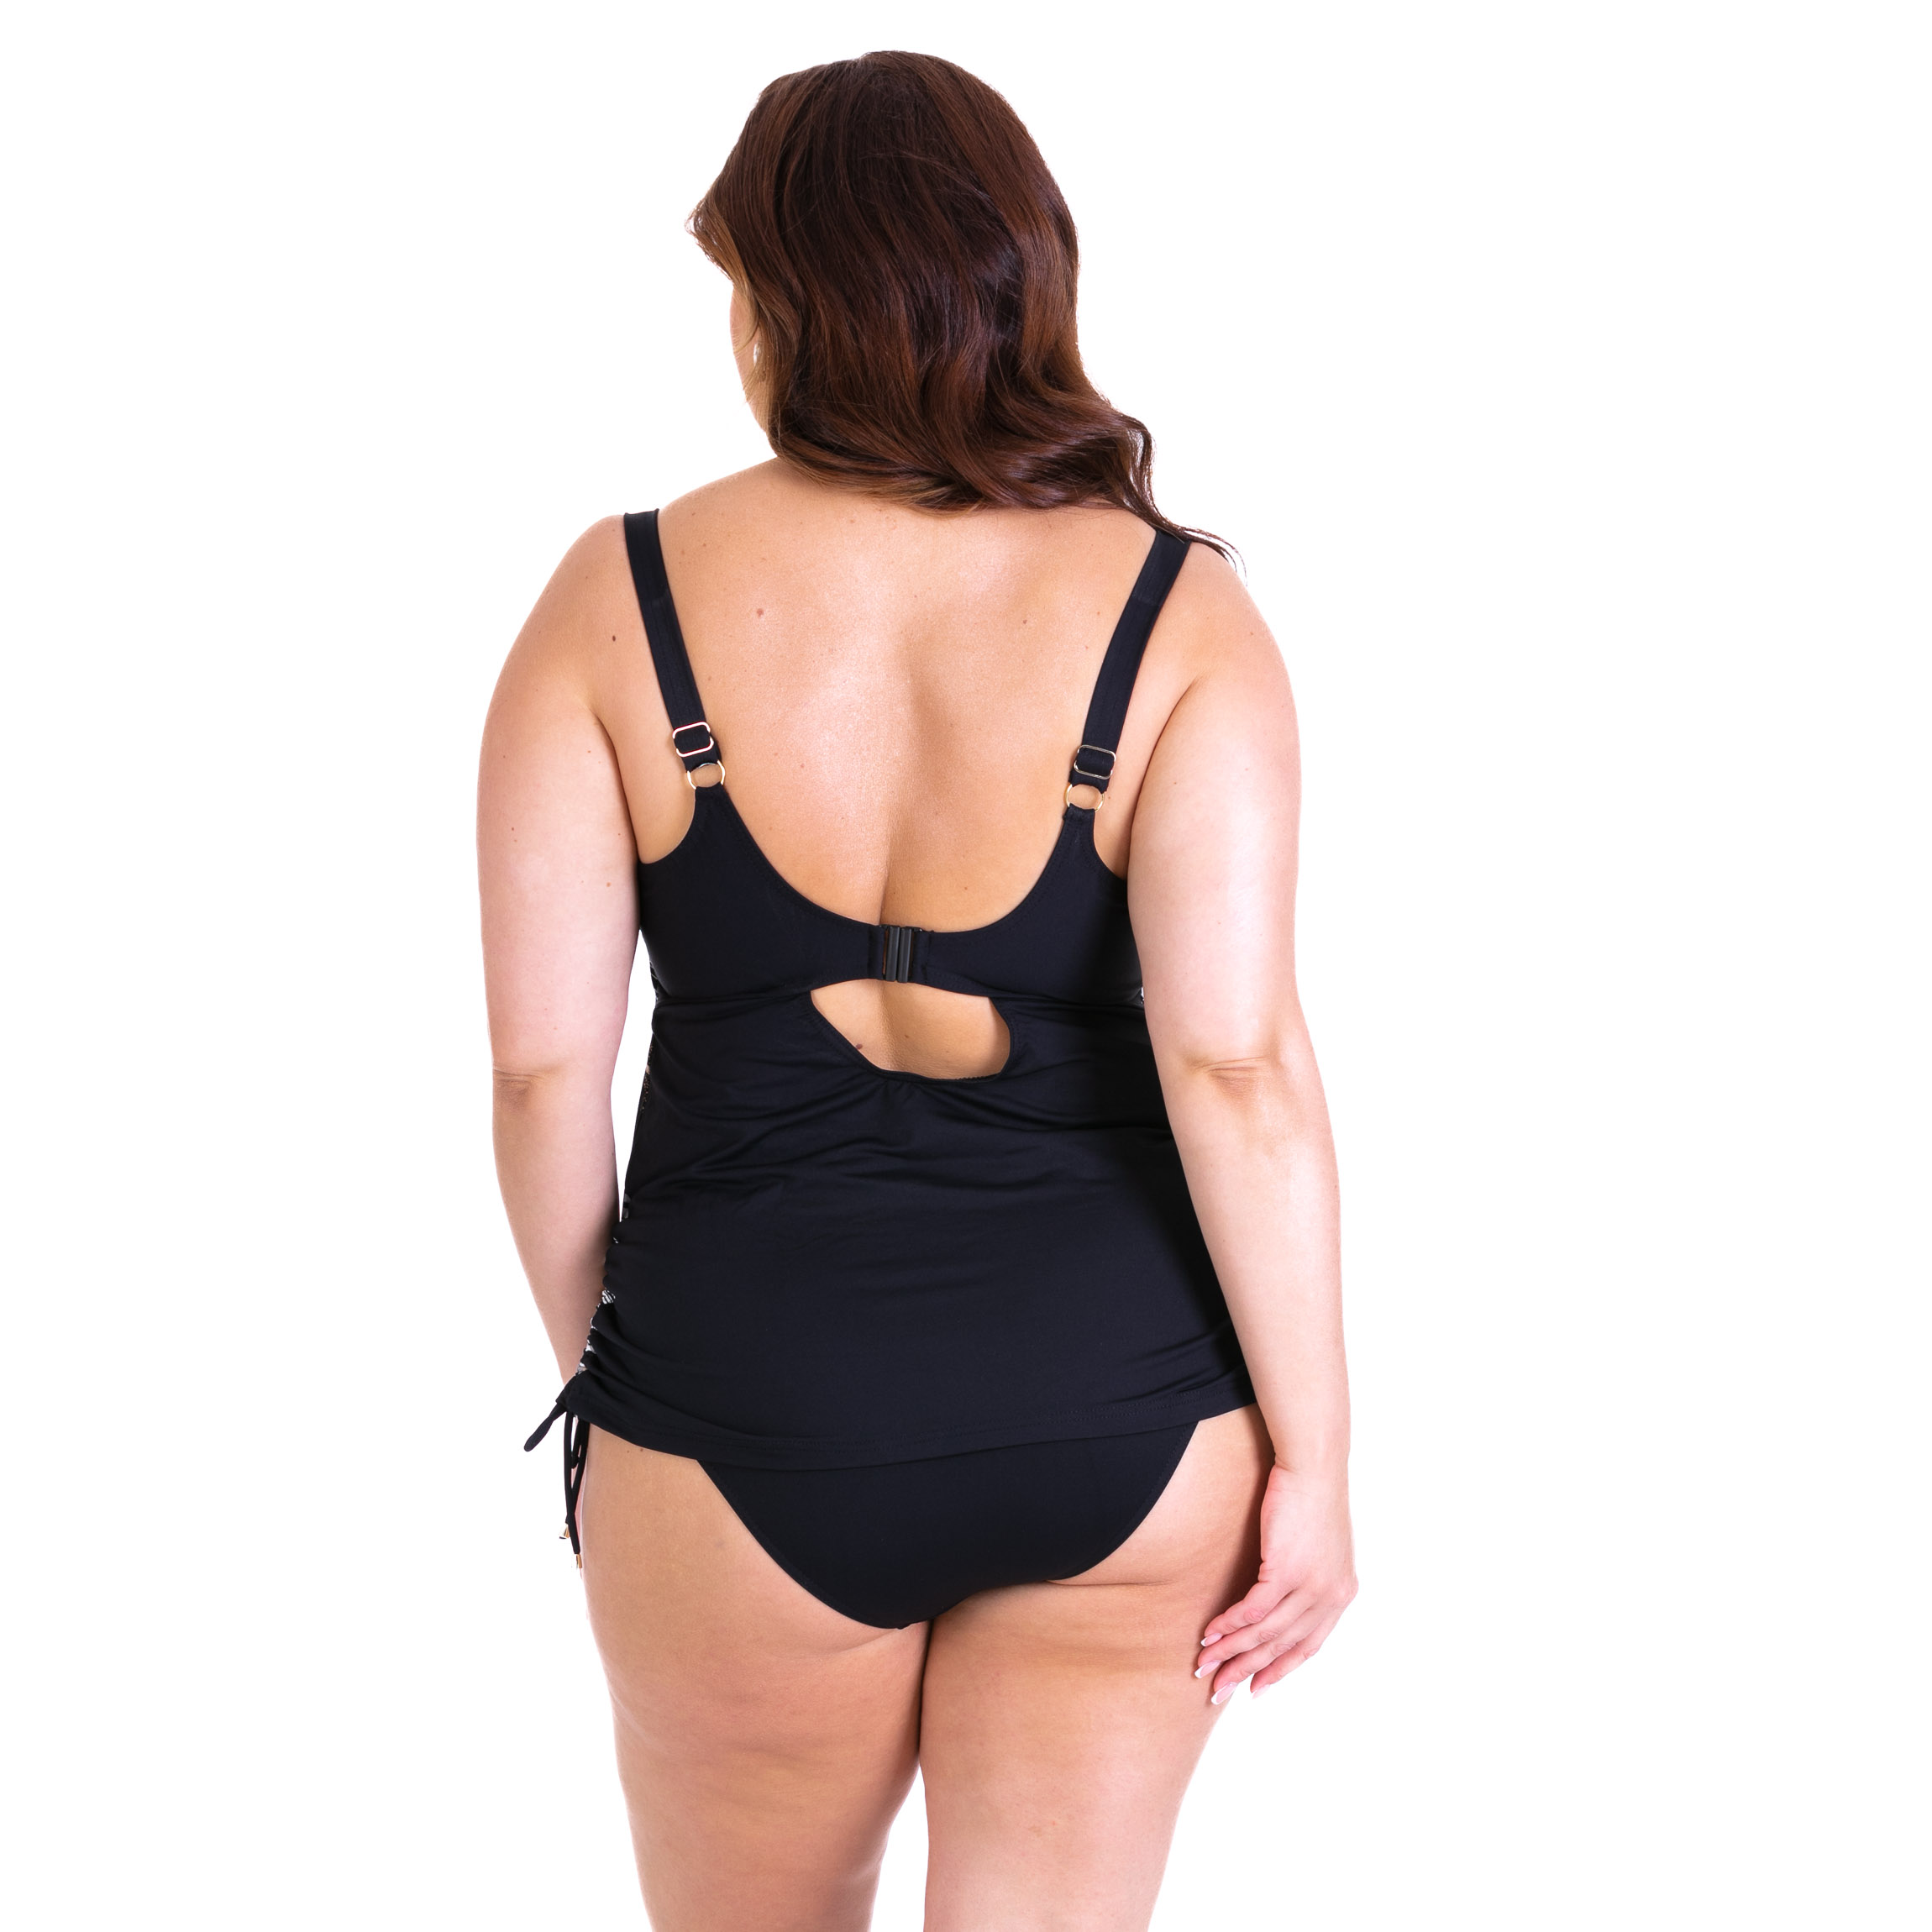 Fashionable Loren F11 tankini for large breasts - fall in love with LAVEL